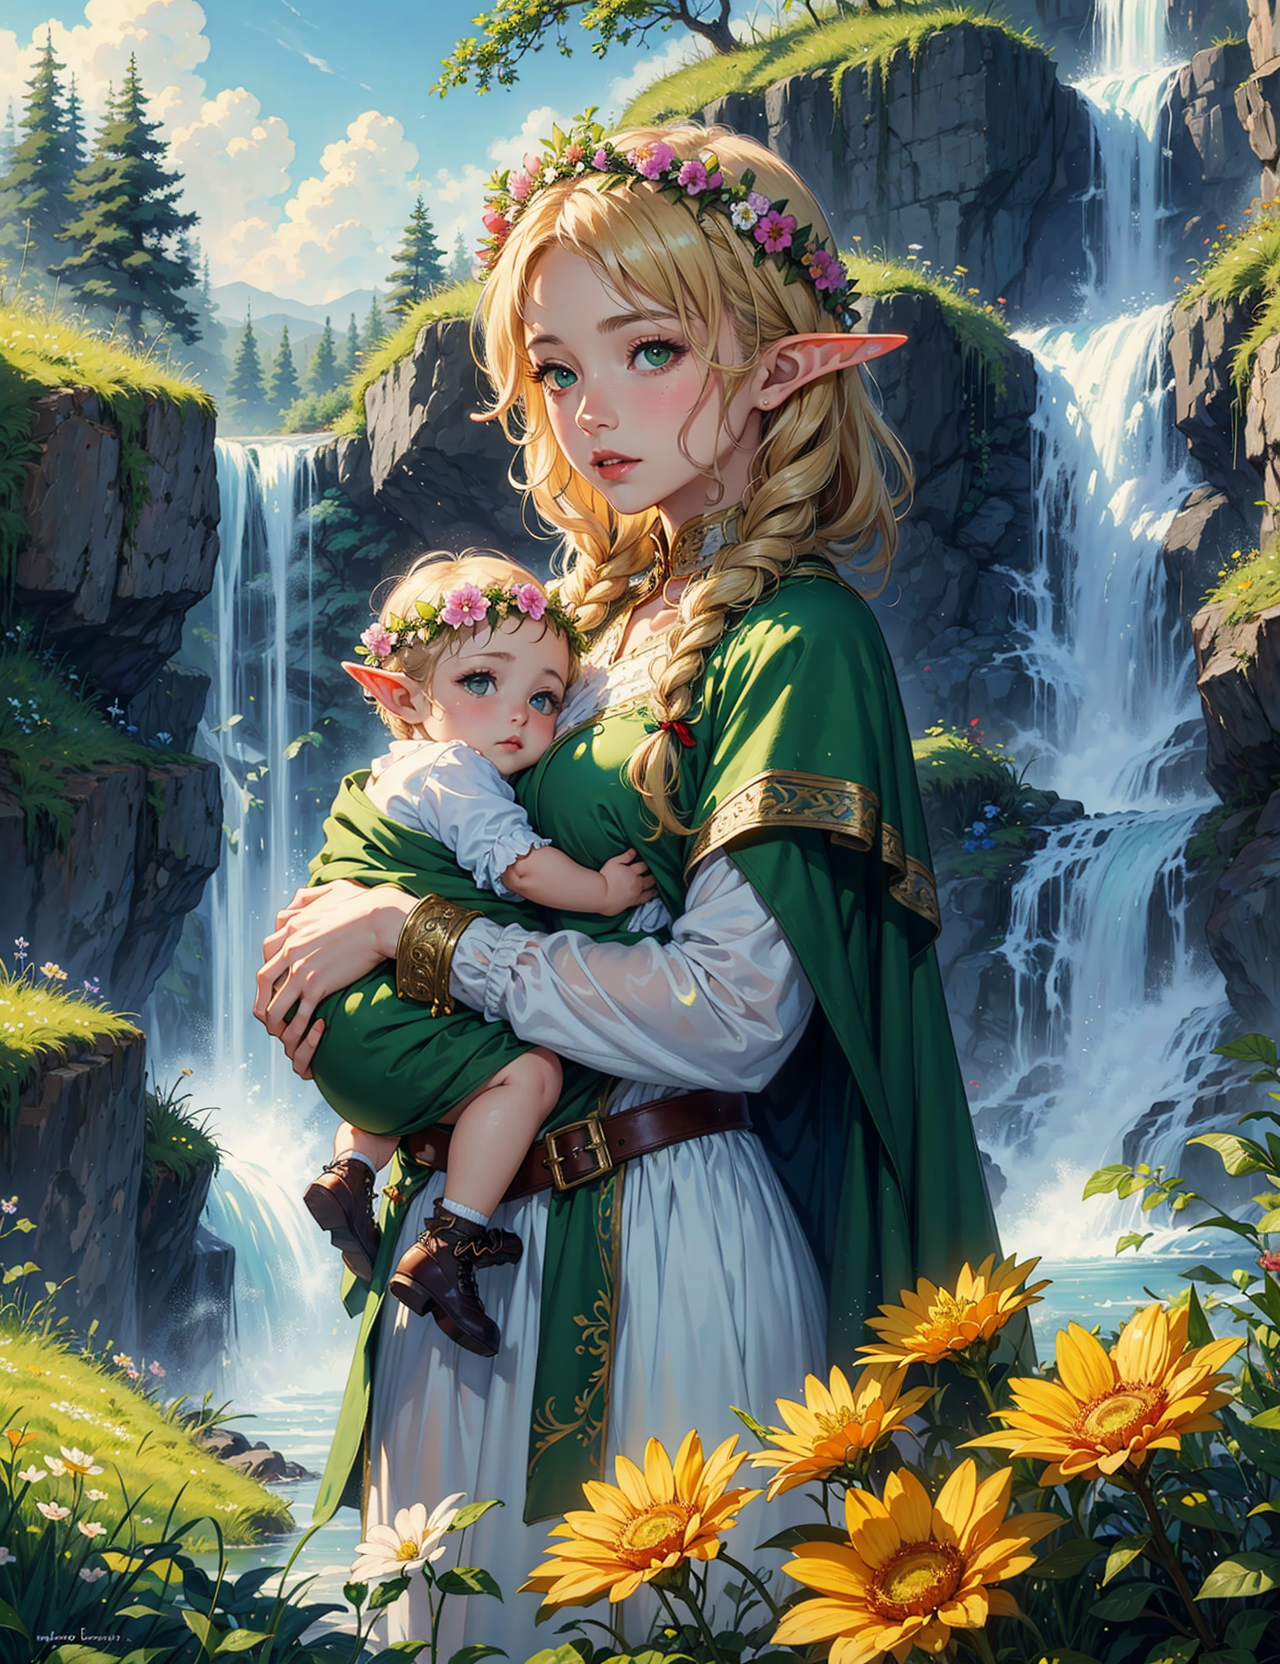 masterpiece, best quality,
a detailed ilustration of a female elf druid with a cloak made with grass and flowers, with a b...